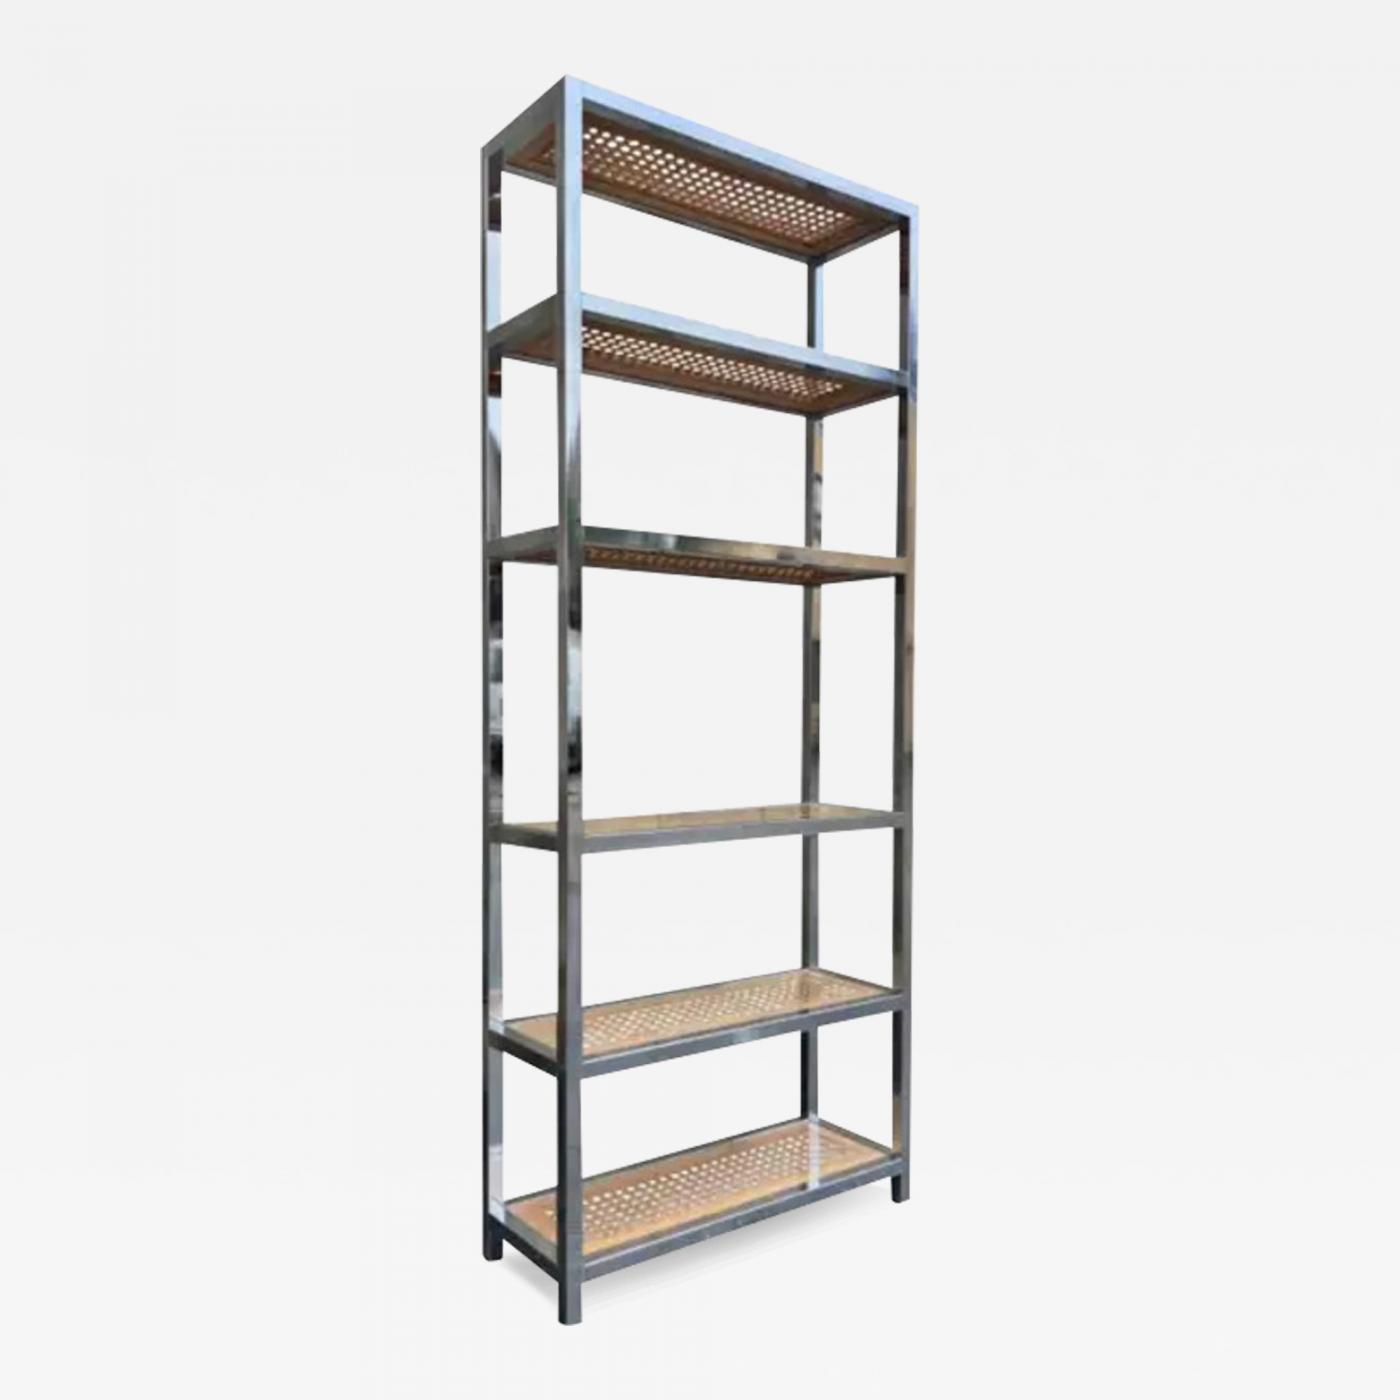 Vintage Brass Etagere in the style of Milo Baughman, 1980s shelving unit